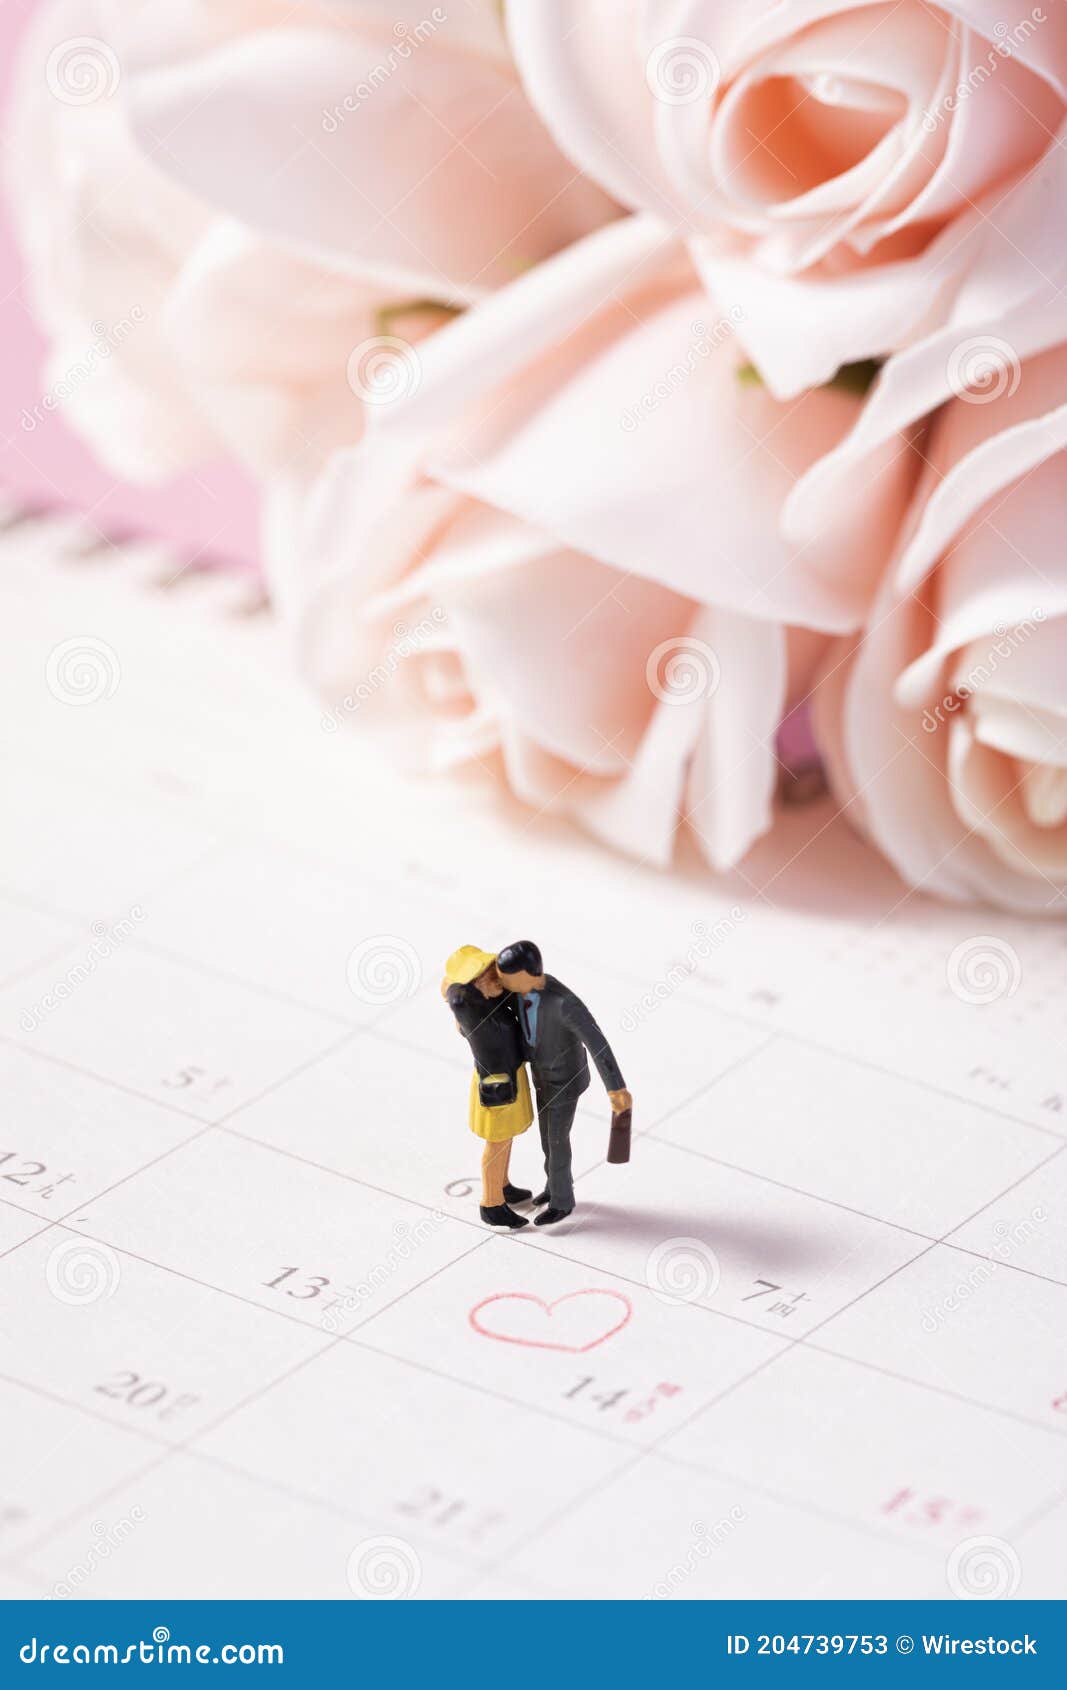 Creative Shot of Valentine S Day Romantic Doll Kissing Couple ...